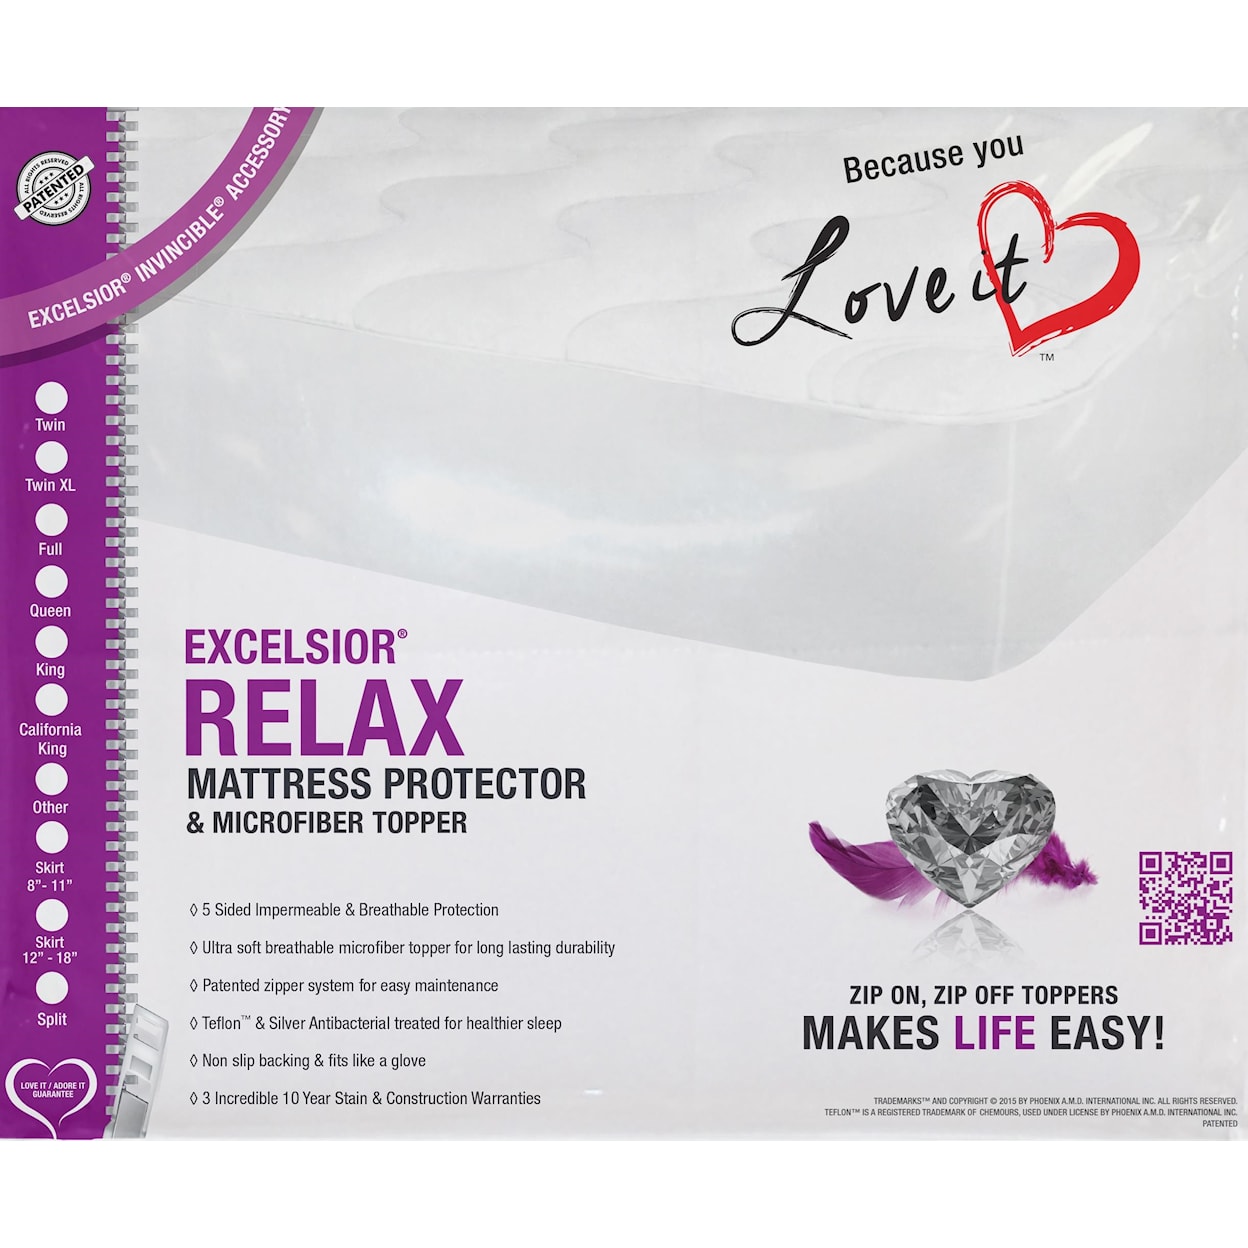 Excelsior Relax 16" Full Mattress Protector